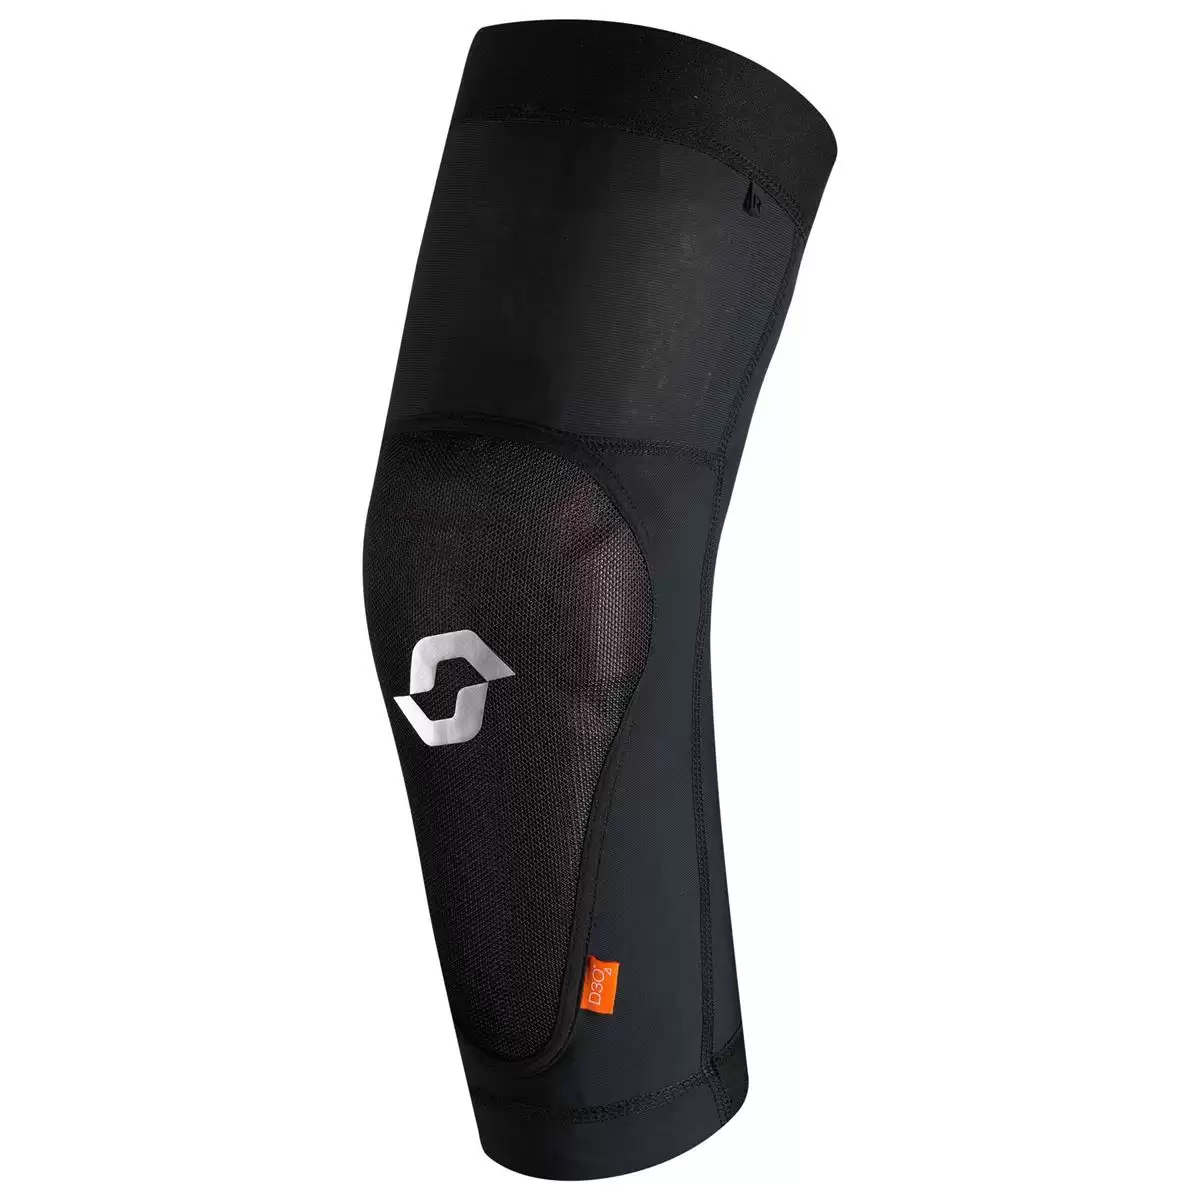 Elbow guards Softcon 2 Black/Grey - Size M - image